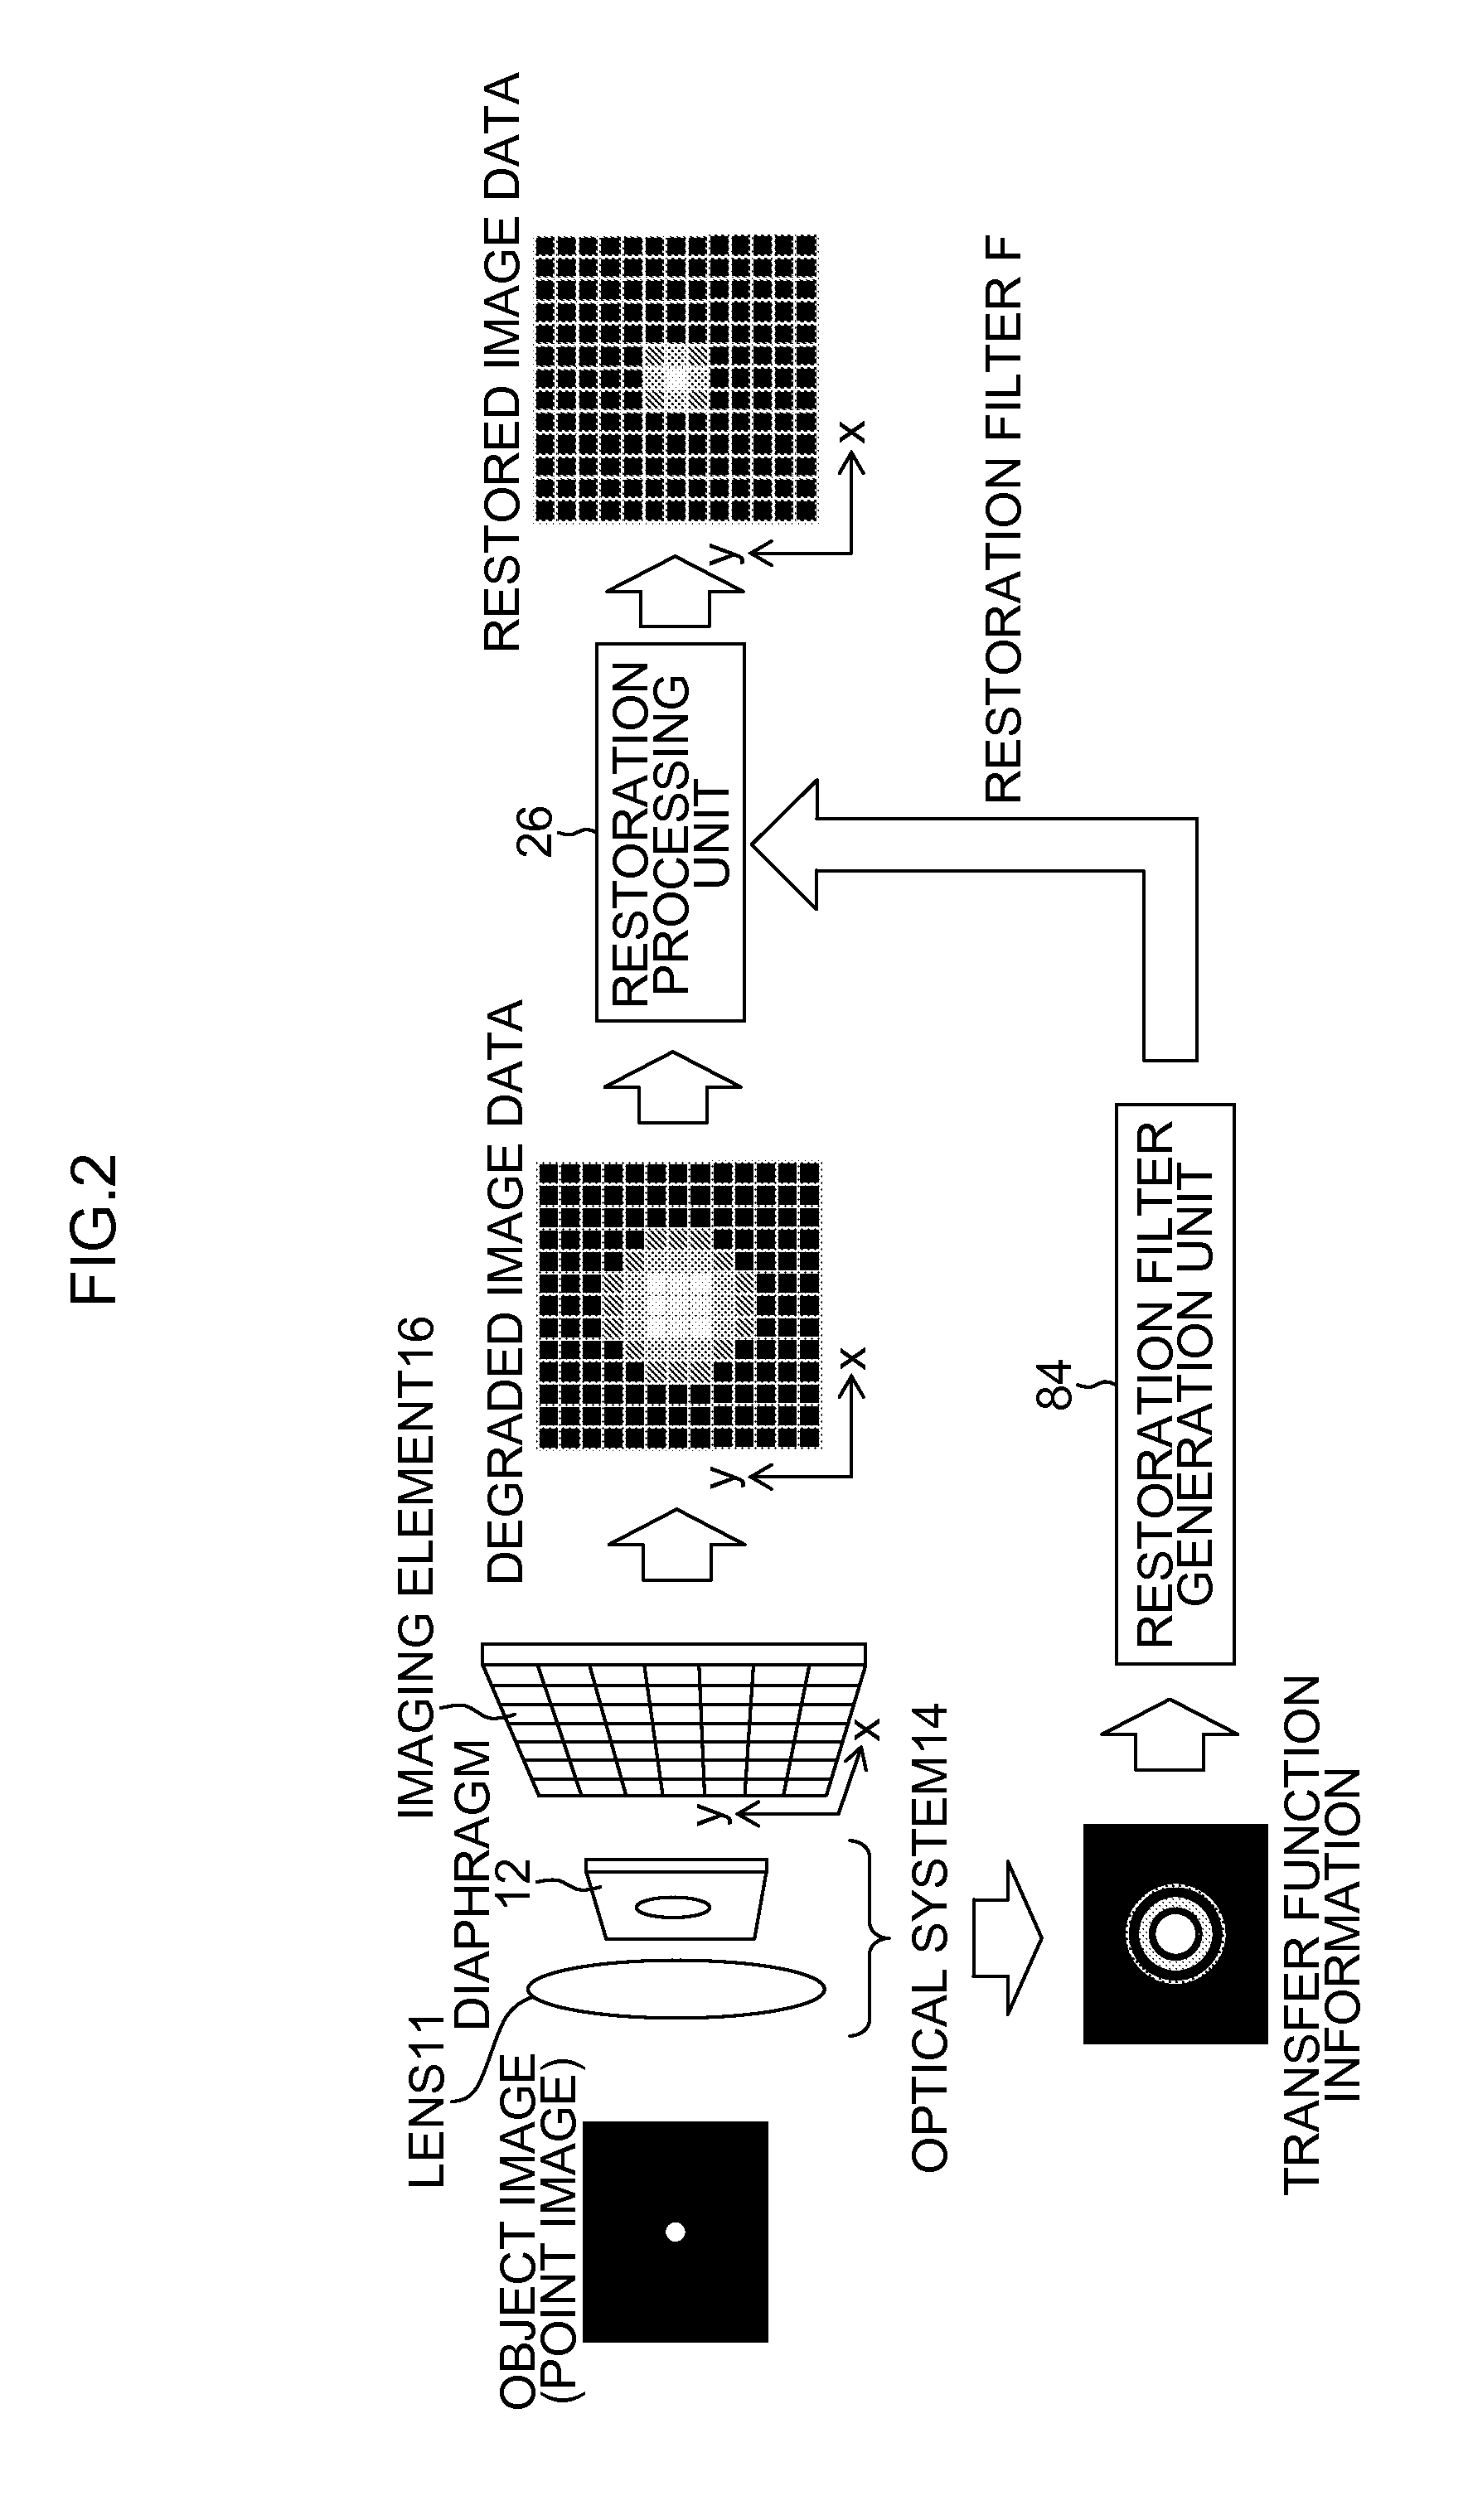 Restoration filter generation device and method, image processing device and method, imaging device, and non-transitory computer-readable medium